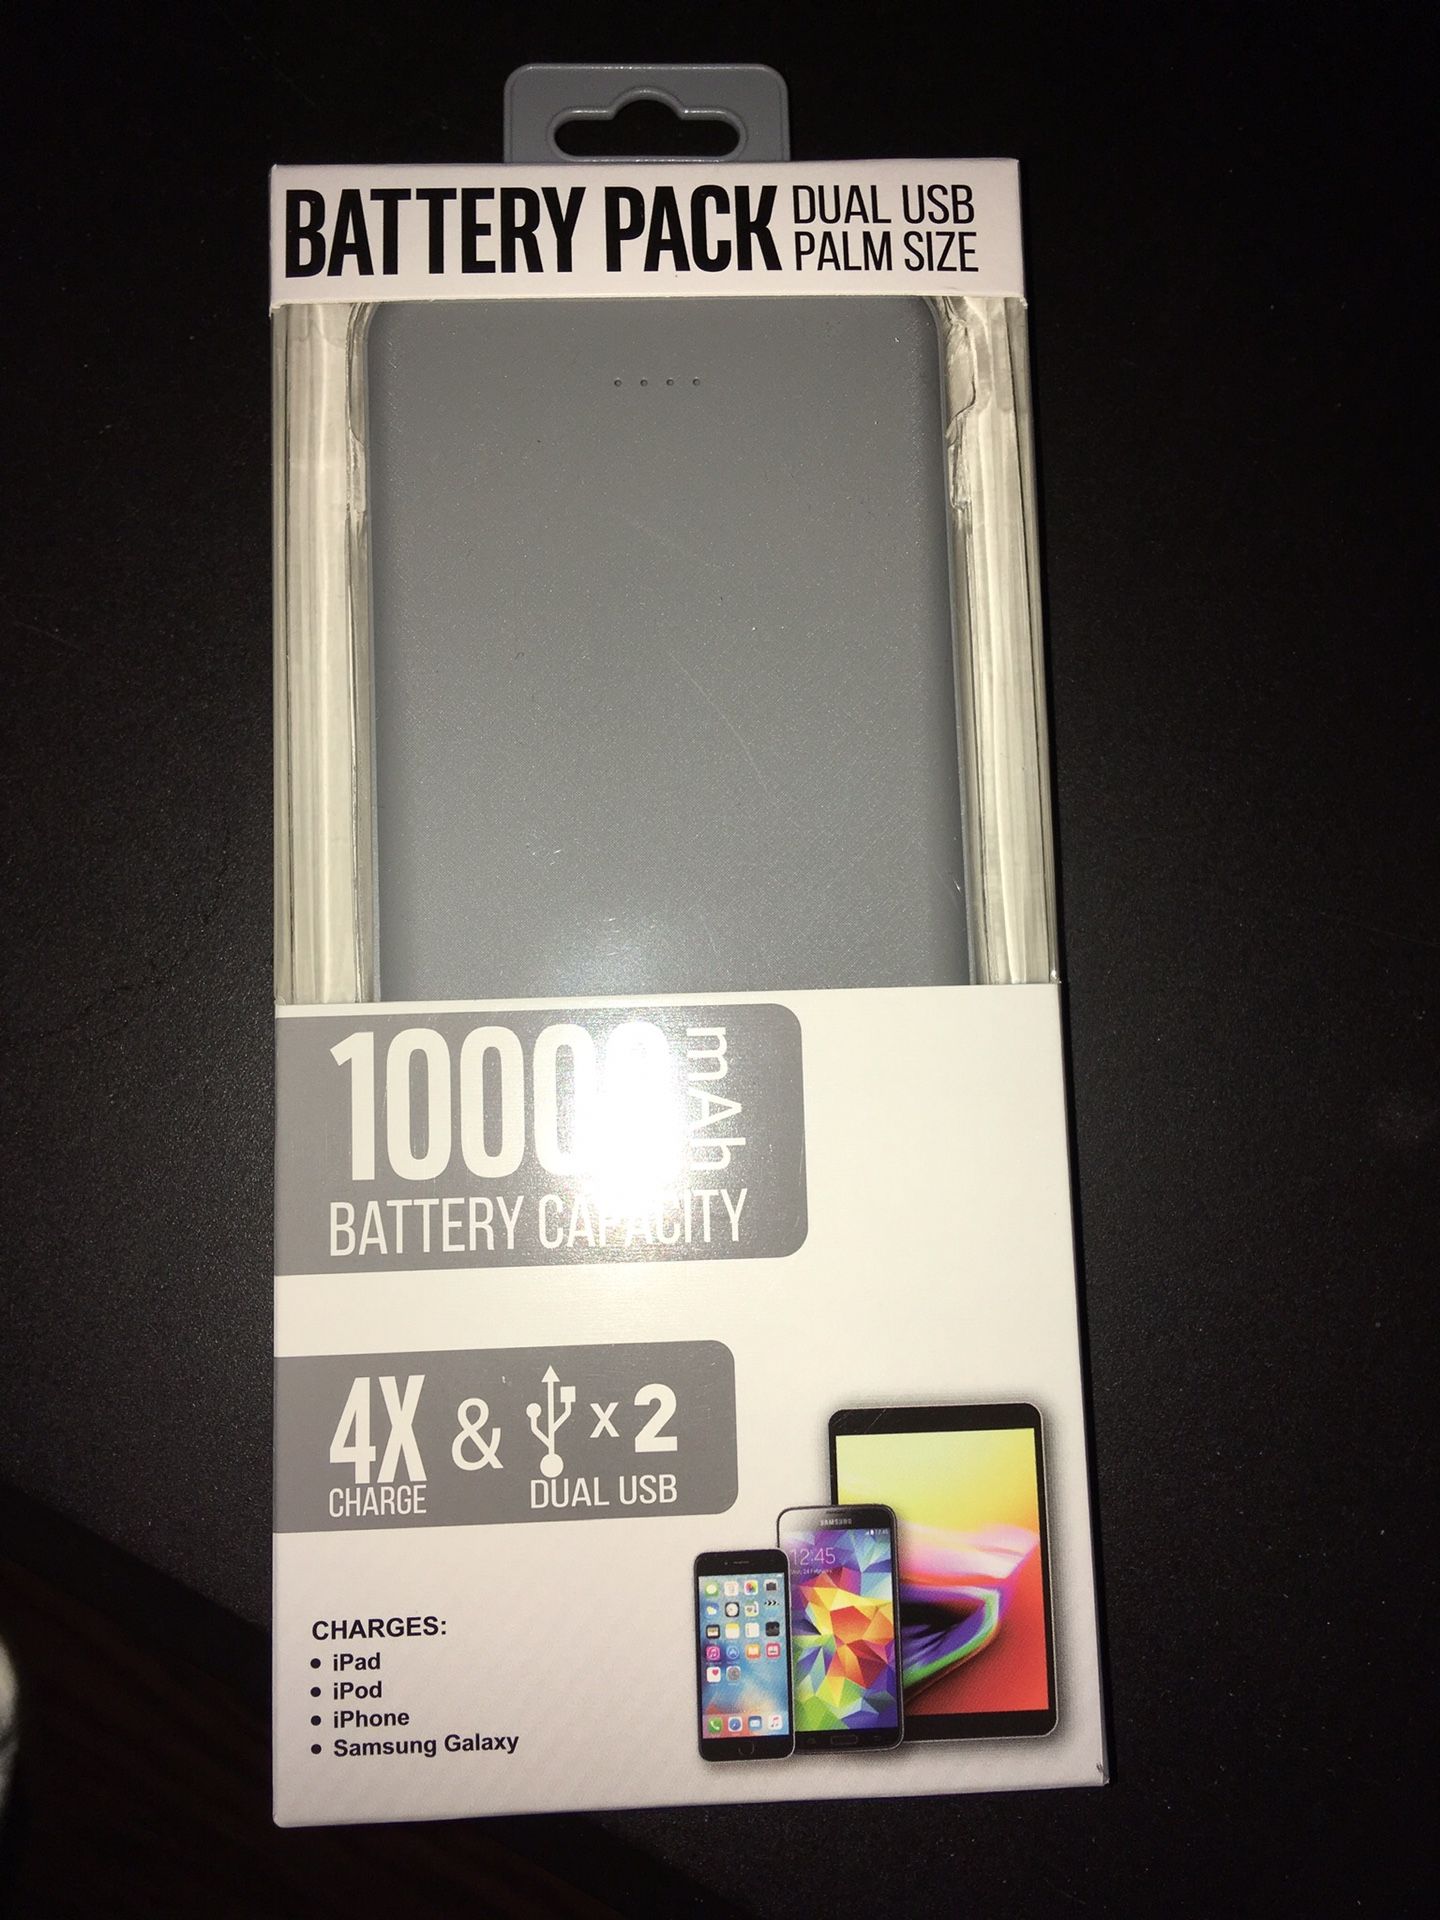 10,000 mAh Cell Phone Portable Battery Pack/ Power Bank - 2 Full Phone Charges!!